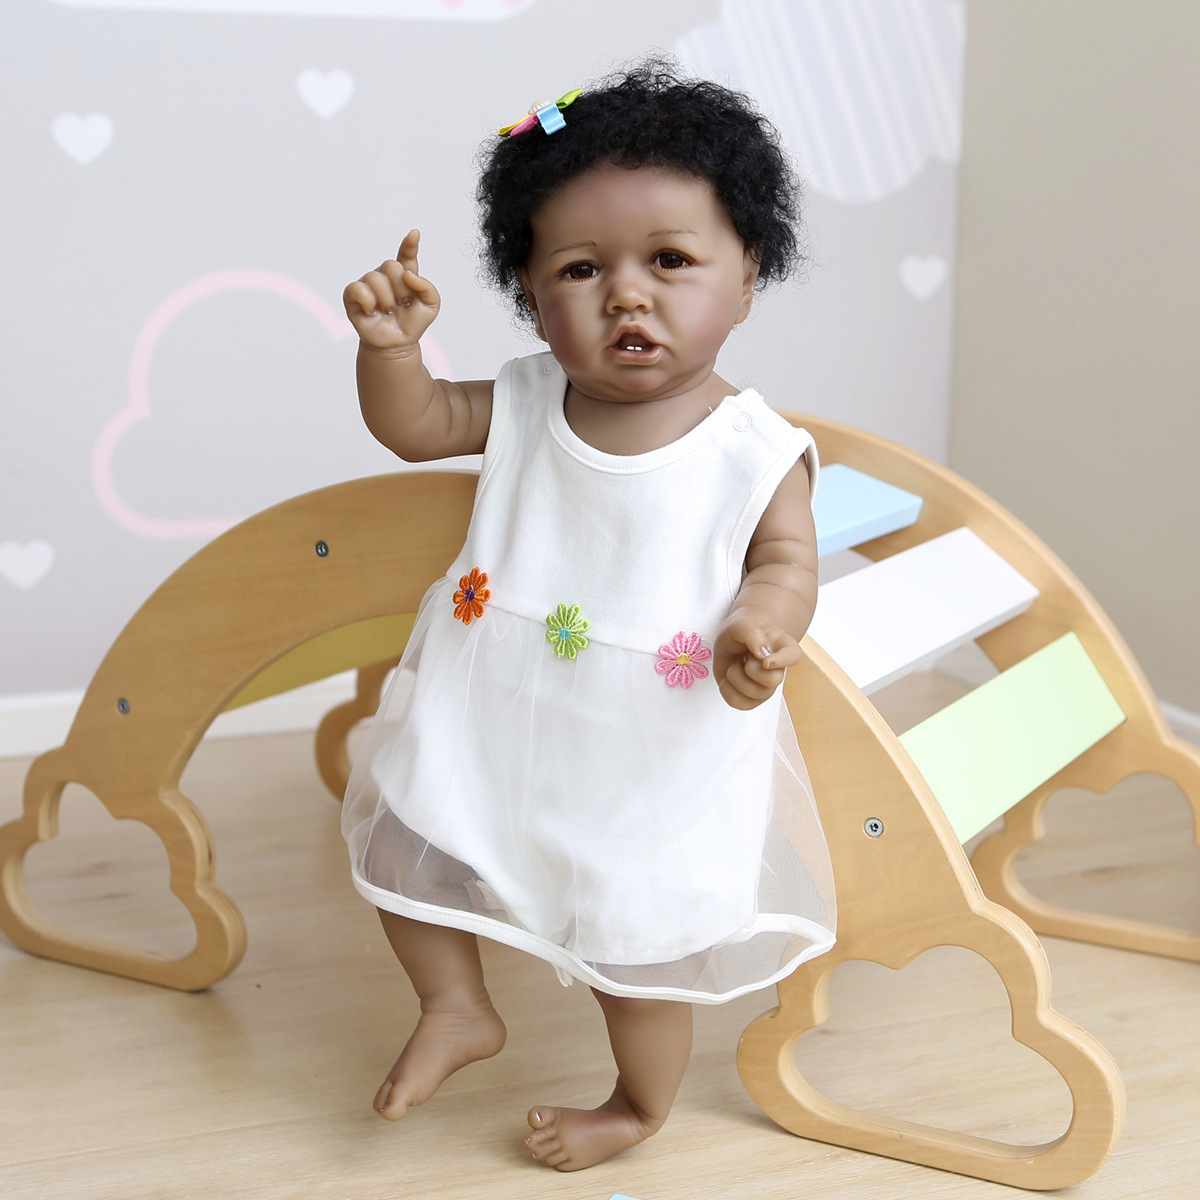 CozyPlushies Lifelike Reborn Toddler Doll: Realistic Simulation for Play & Collectors